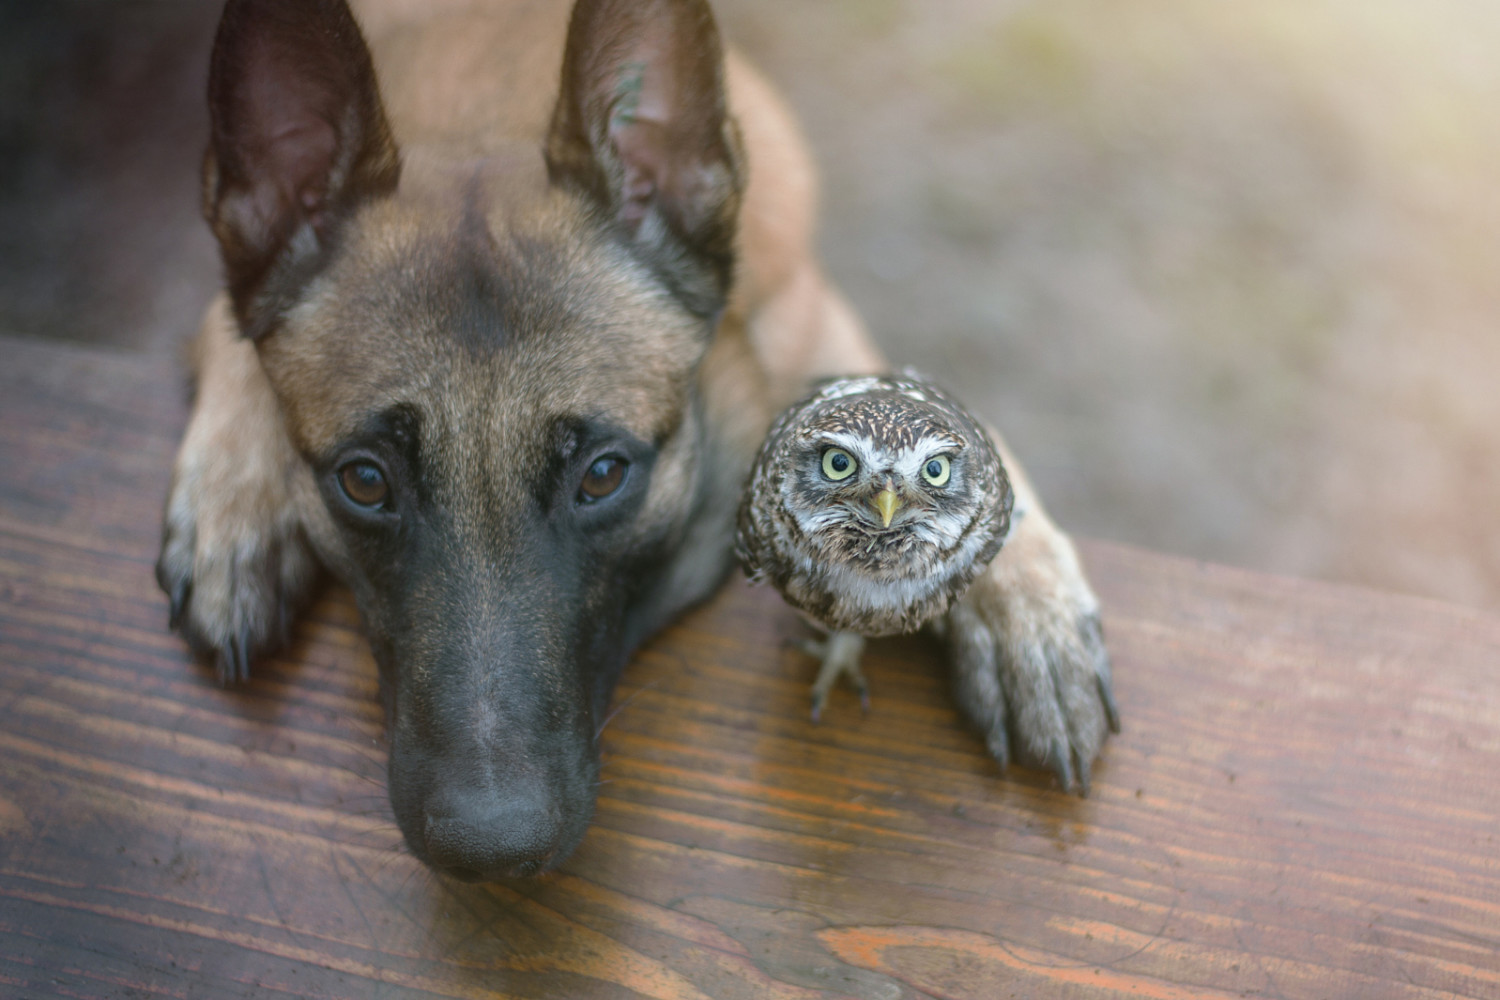 Big and Small, Together at Last: 17 Adorable Animal Photos